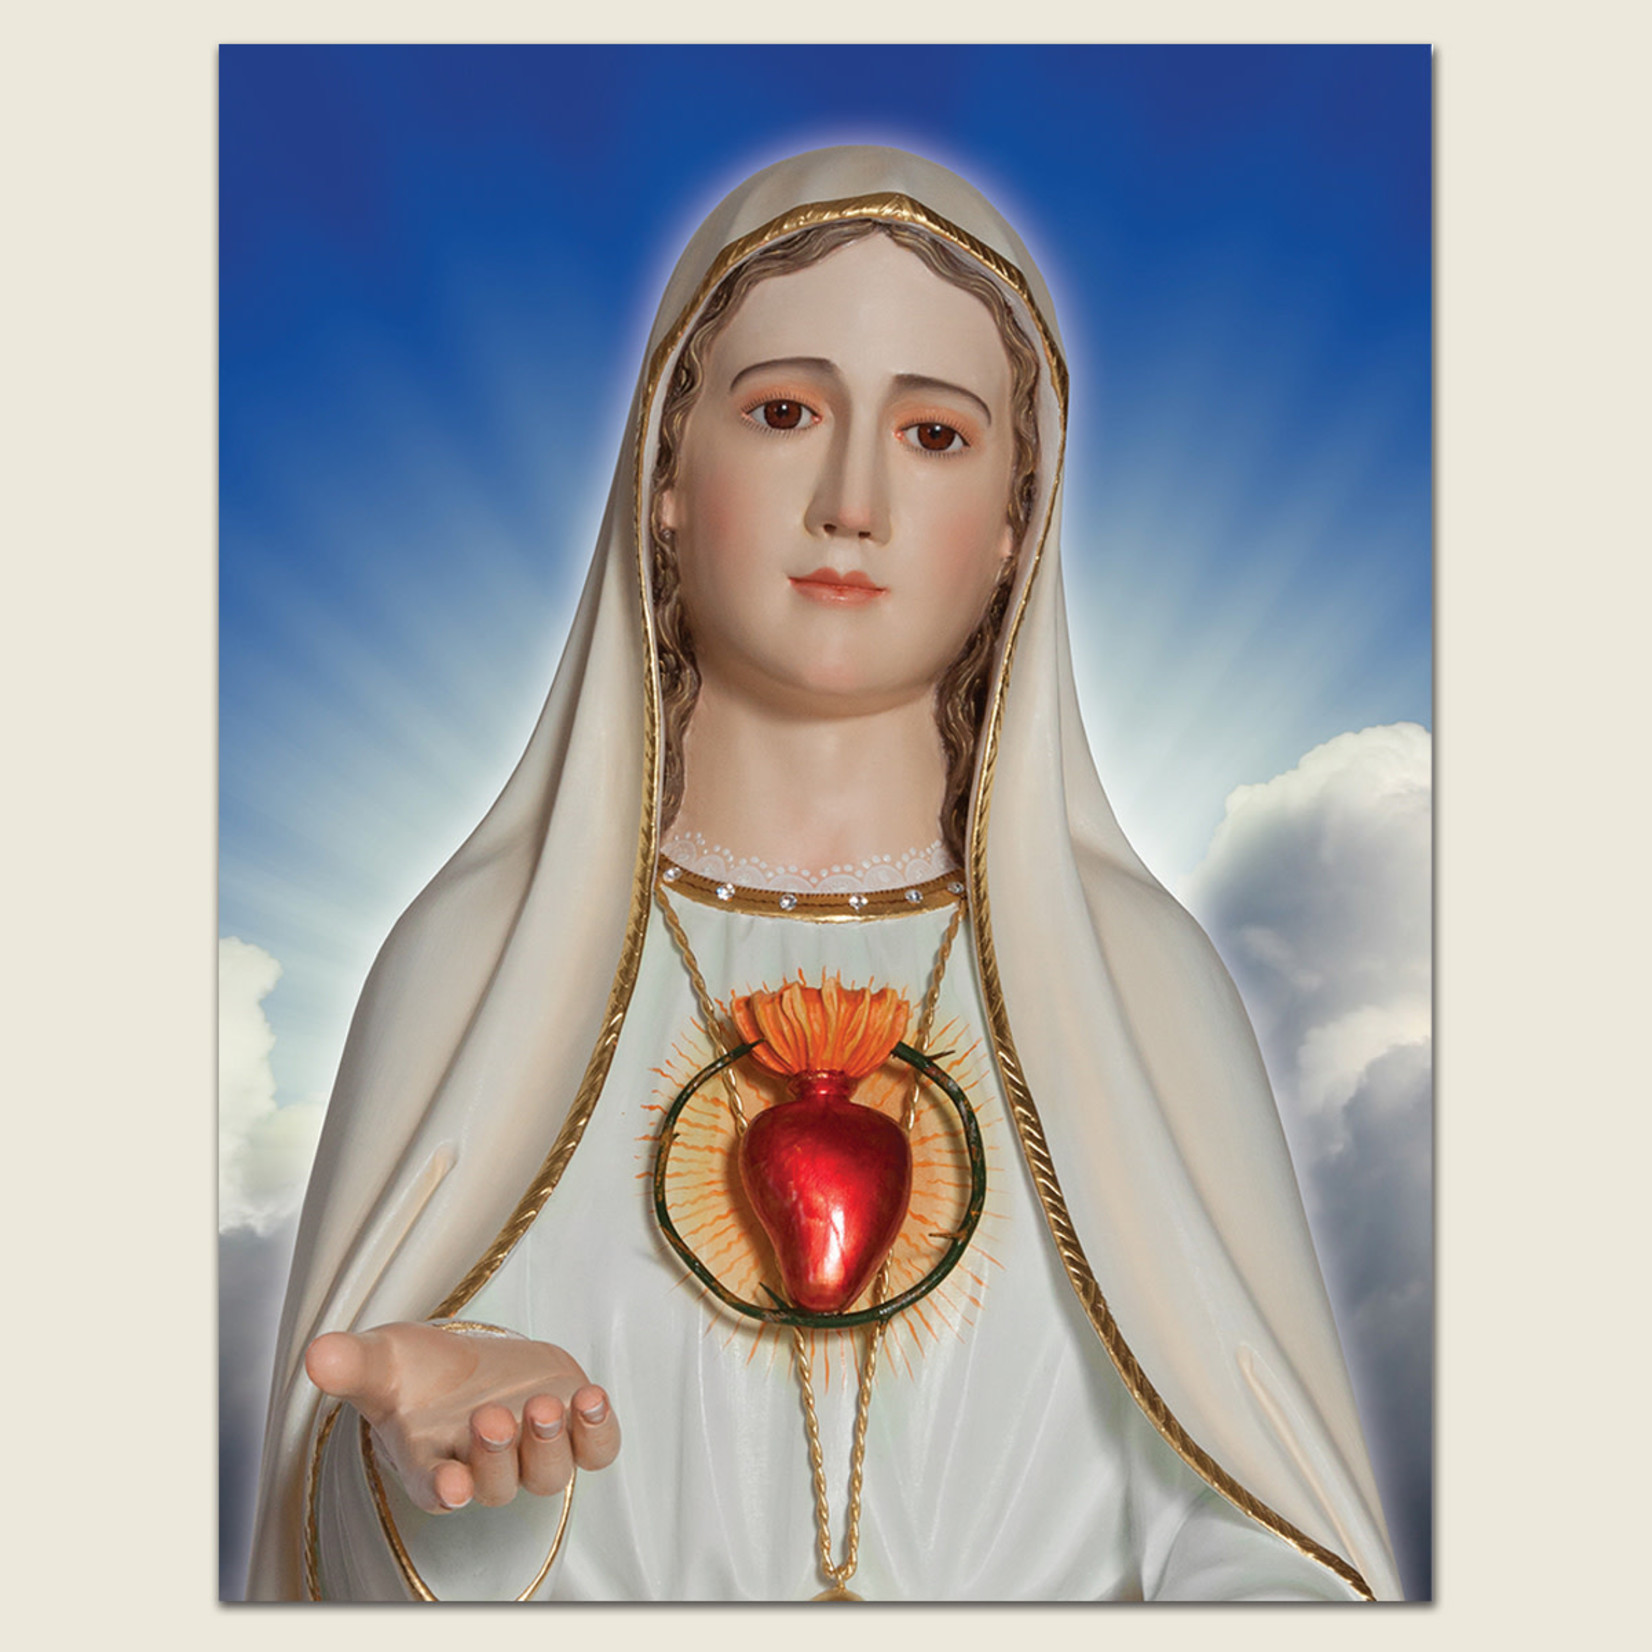 IHMS-P Immaculate Heart Statue Glossy Print (portrait)